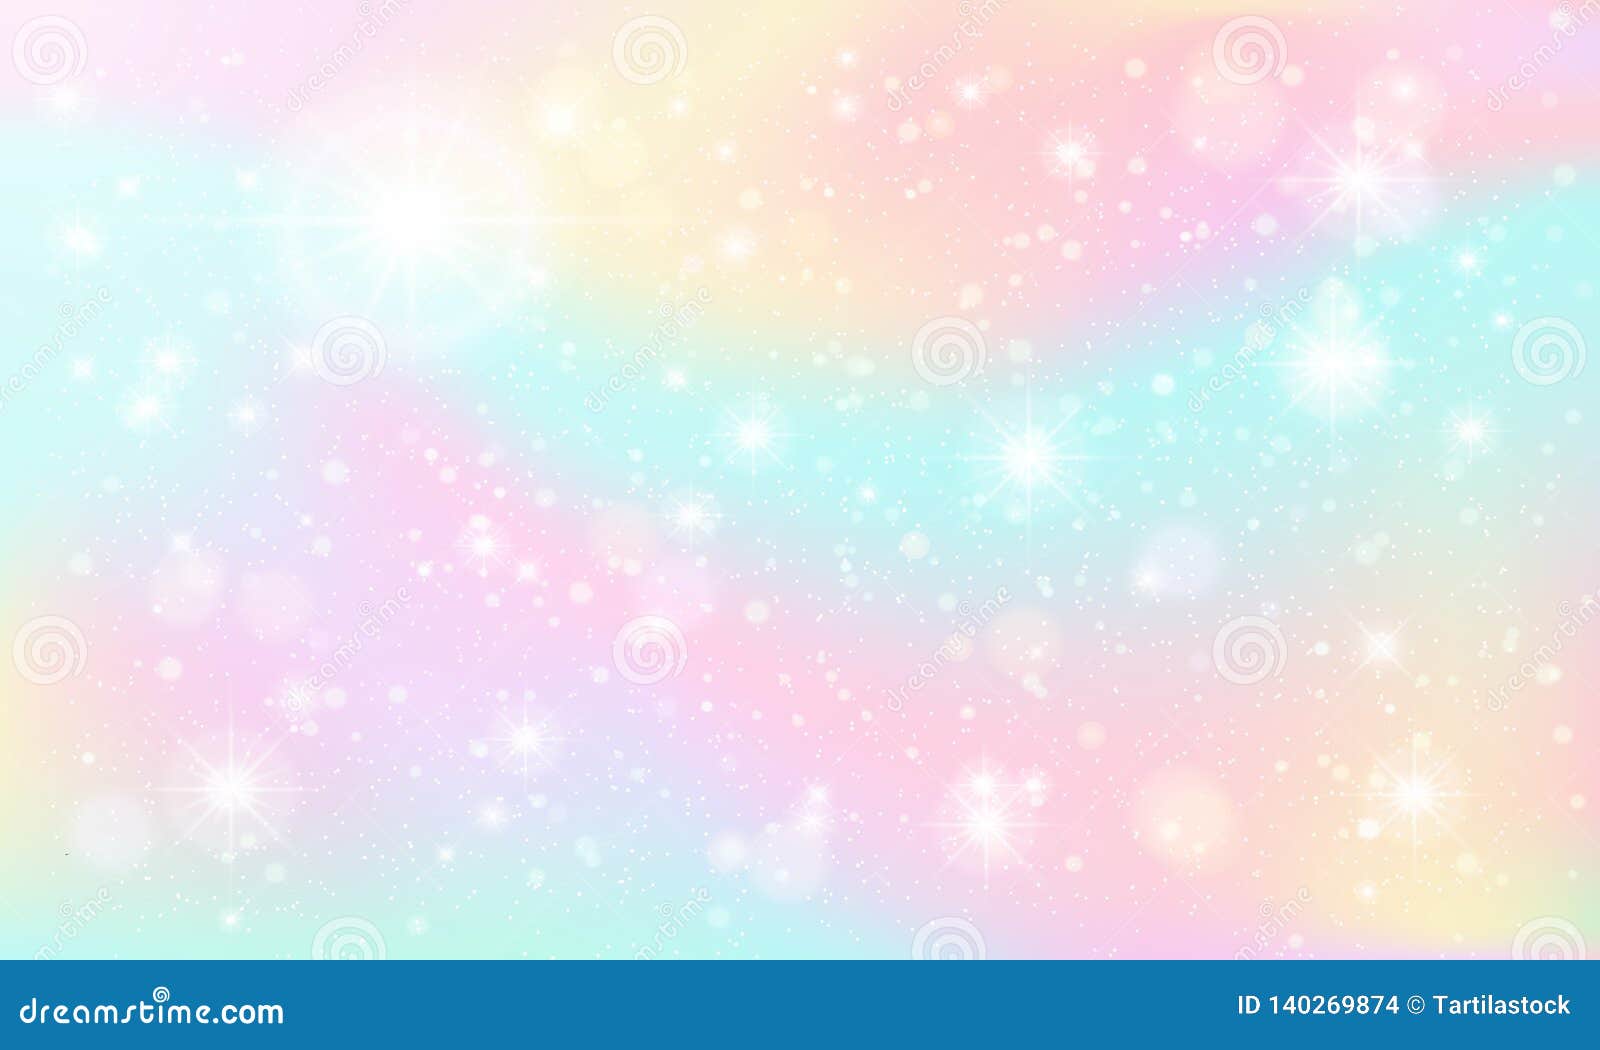 shiny marble sky. fairy fantasy skies, pastel colorful sparkles and fabulous dream sky  background 